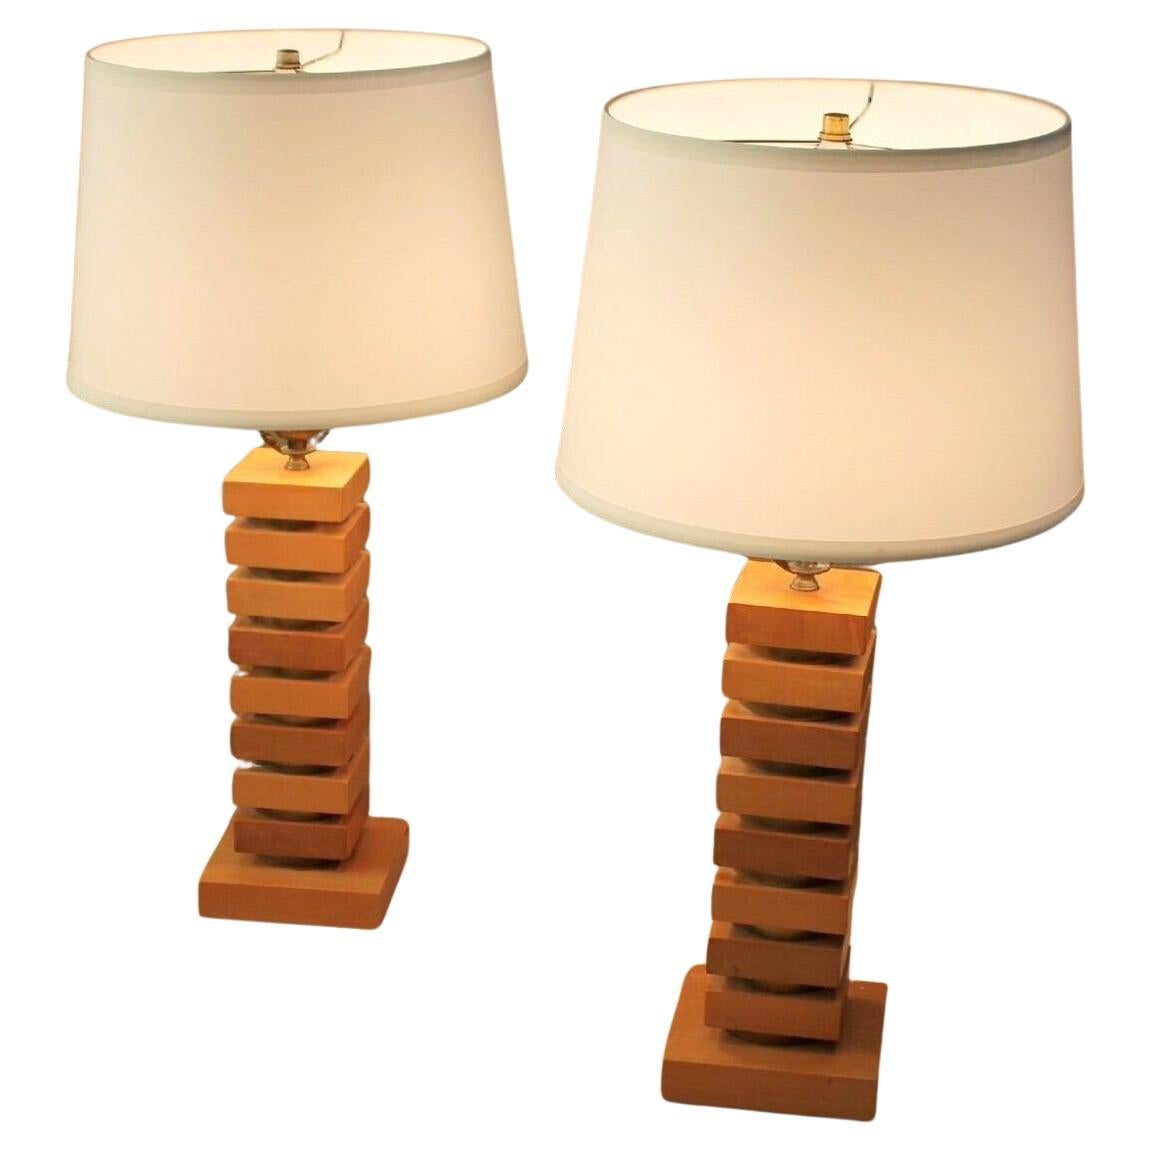 PAIR! ART DECO Maple & Brass STACKED 1940s Table Lamps Russel Wright Skyscraper